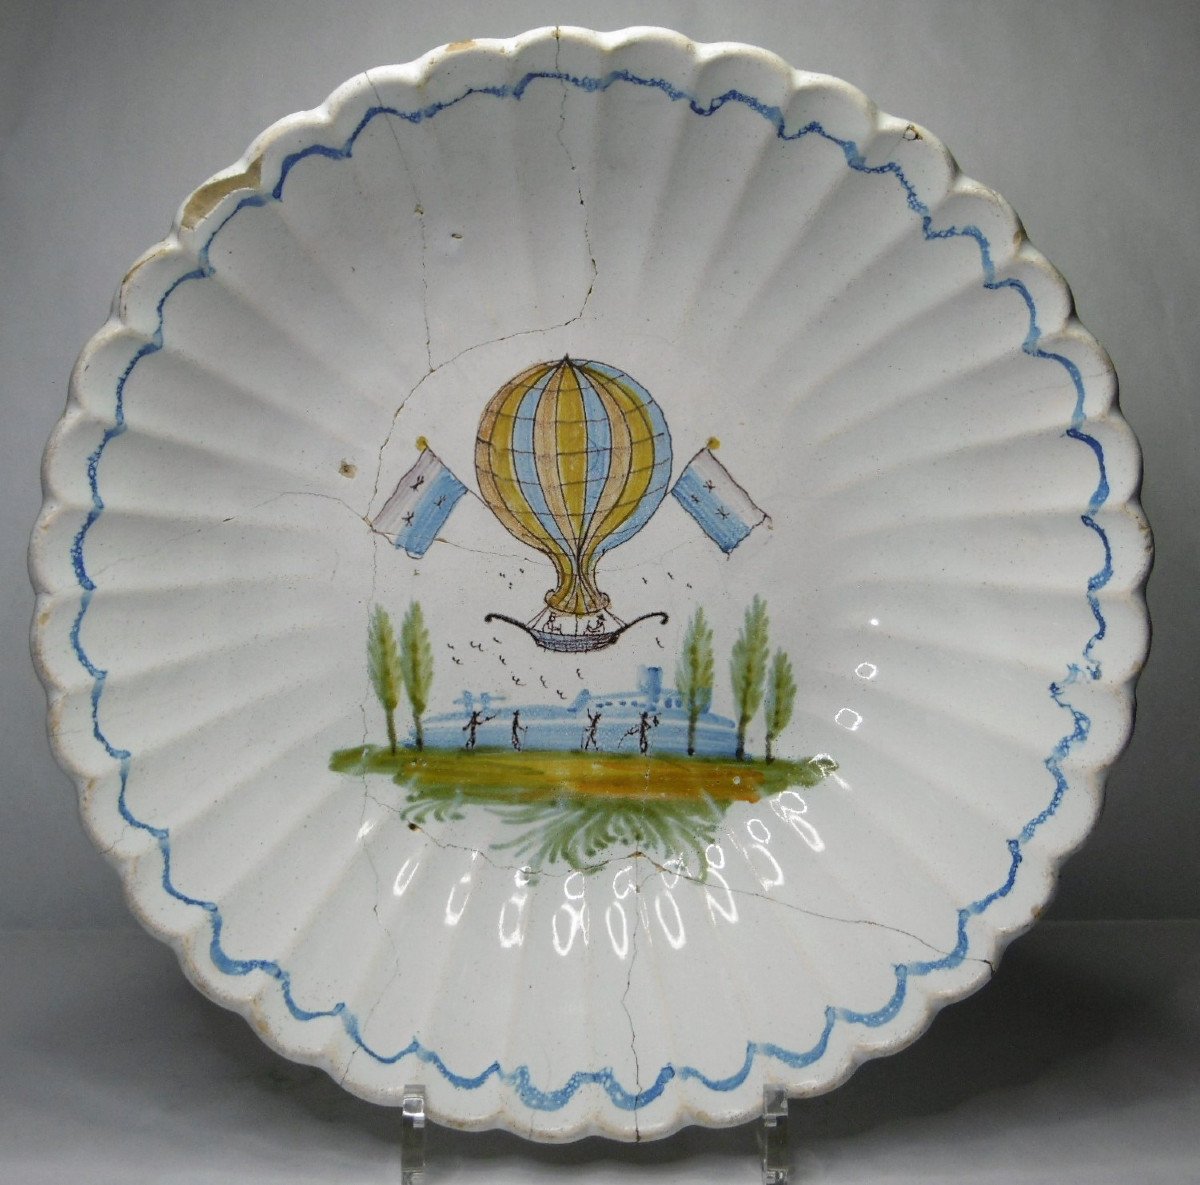 Earthenware From Saint Paul Beauvaisis Dish With Balloon From 18th Century